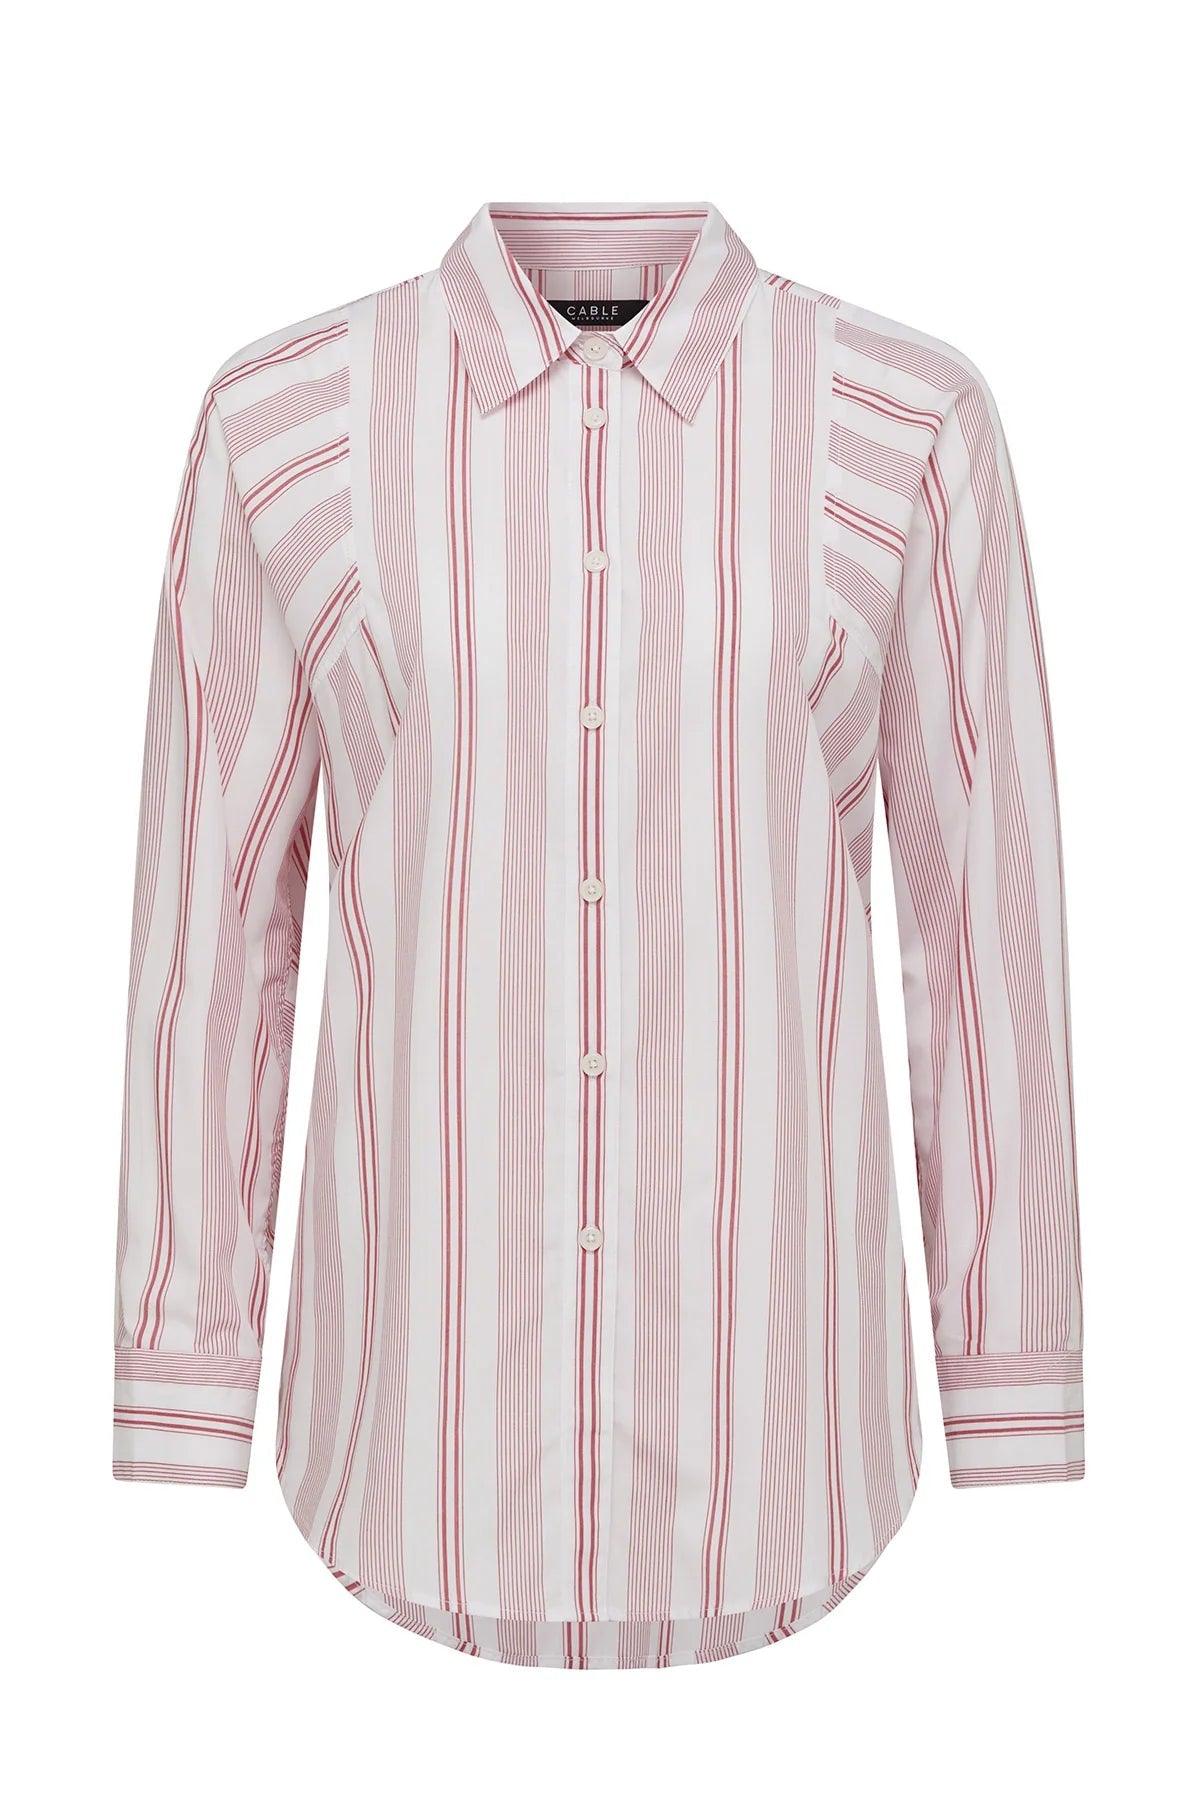 Shop Girlfriend Shirt | Red Stripe - Cable Melbourne